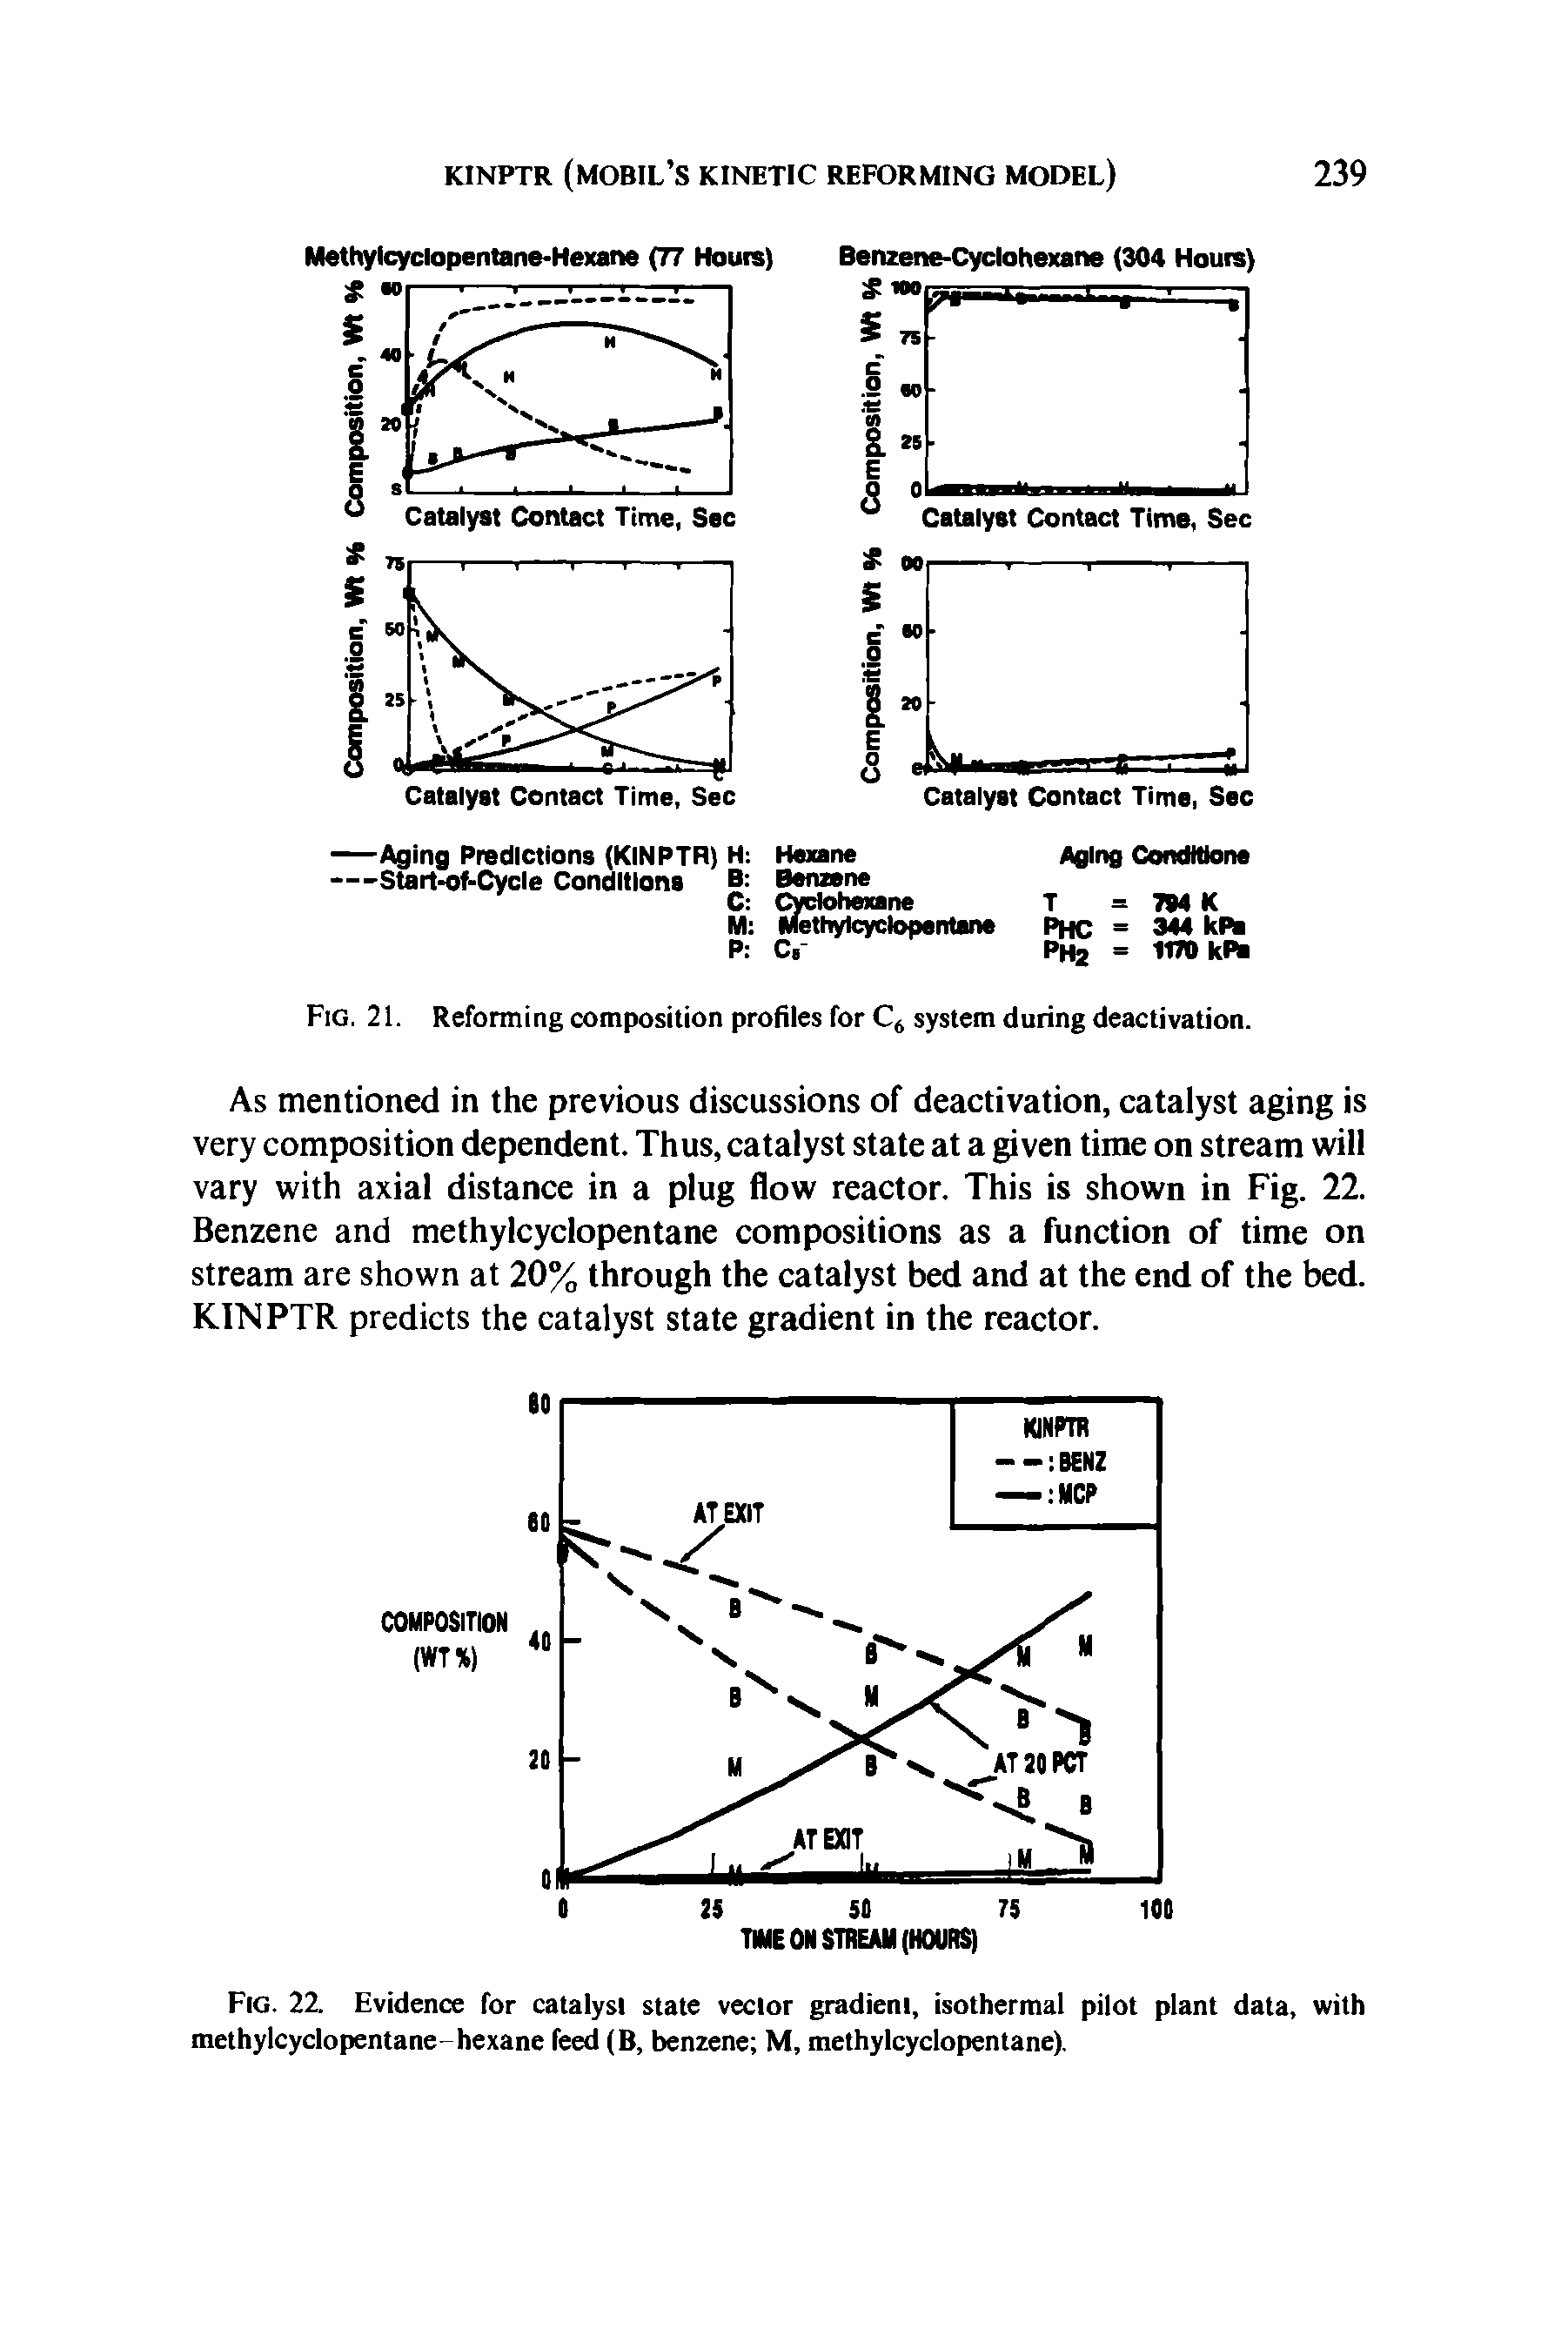 Fig. 21. Reforming composition profiles for C6 system during deactivation.